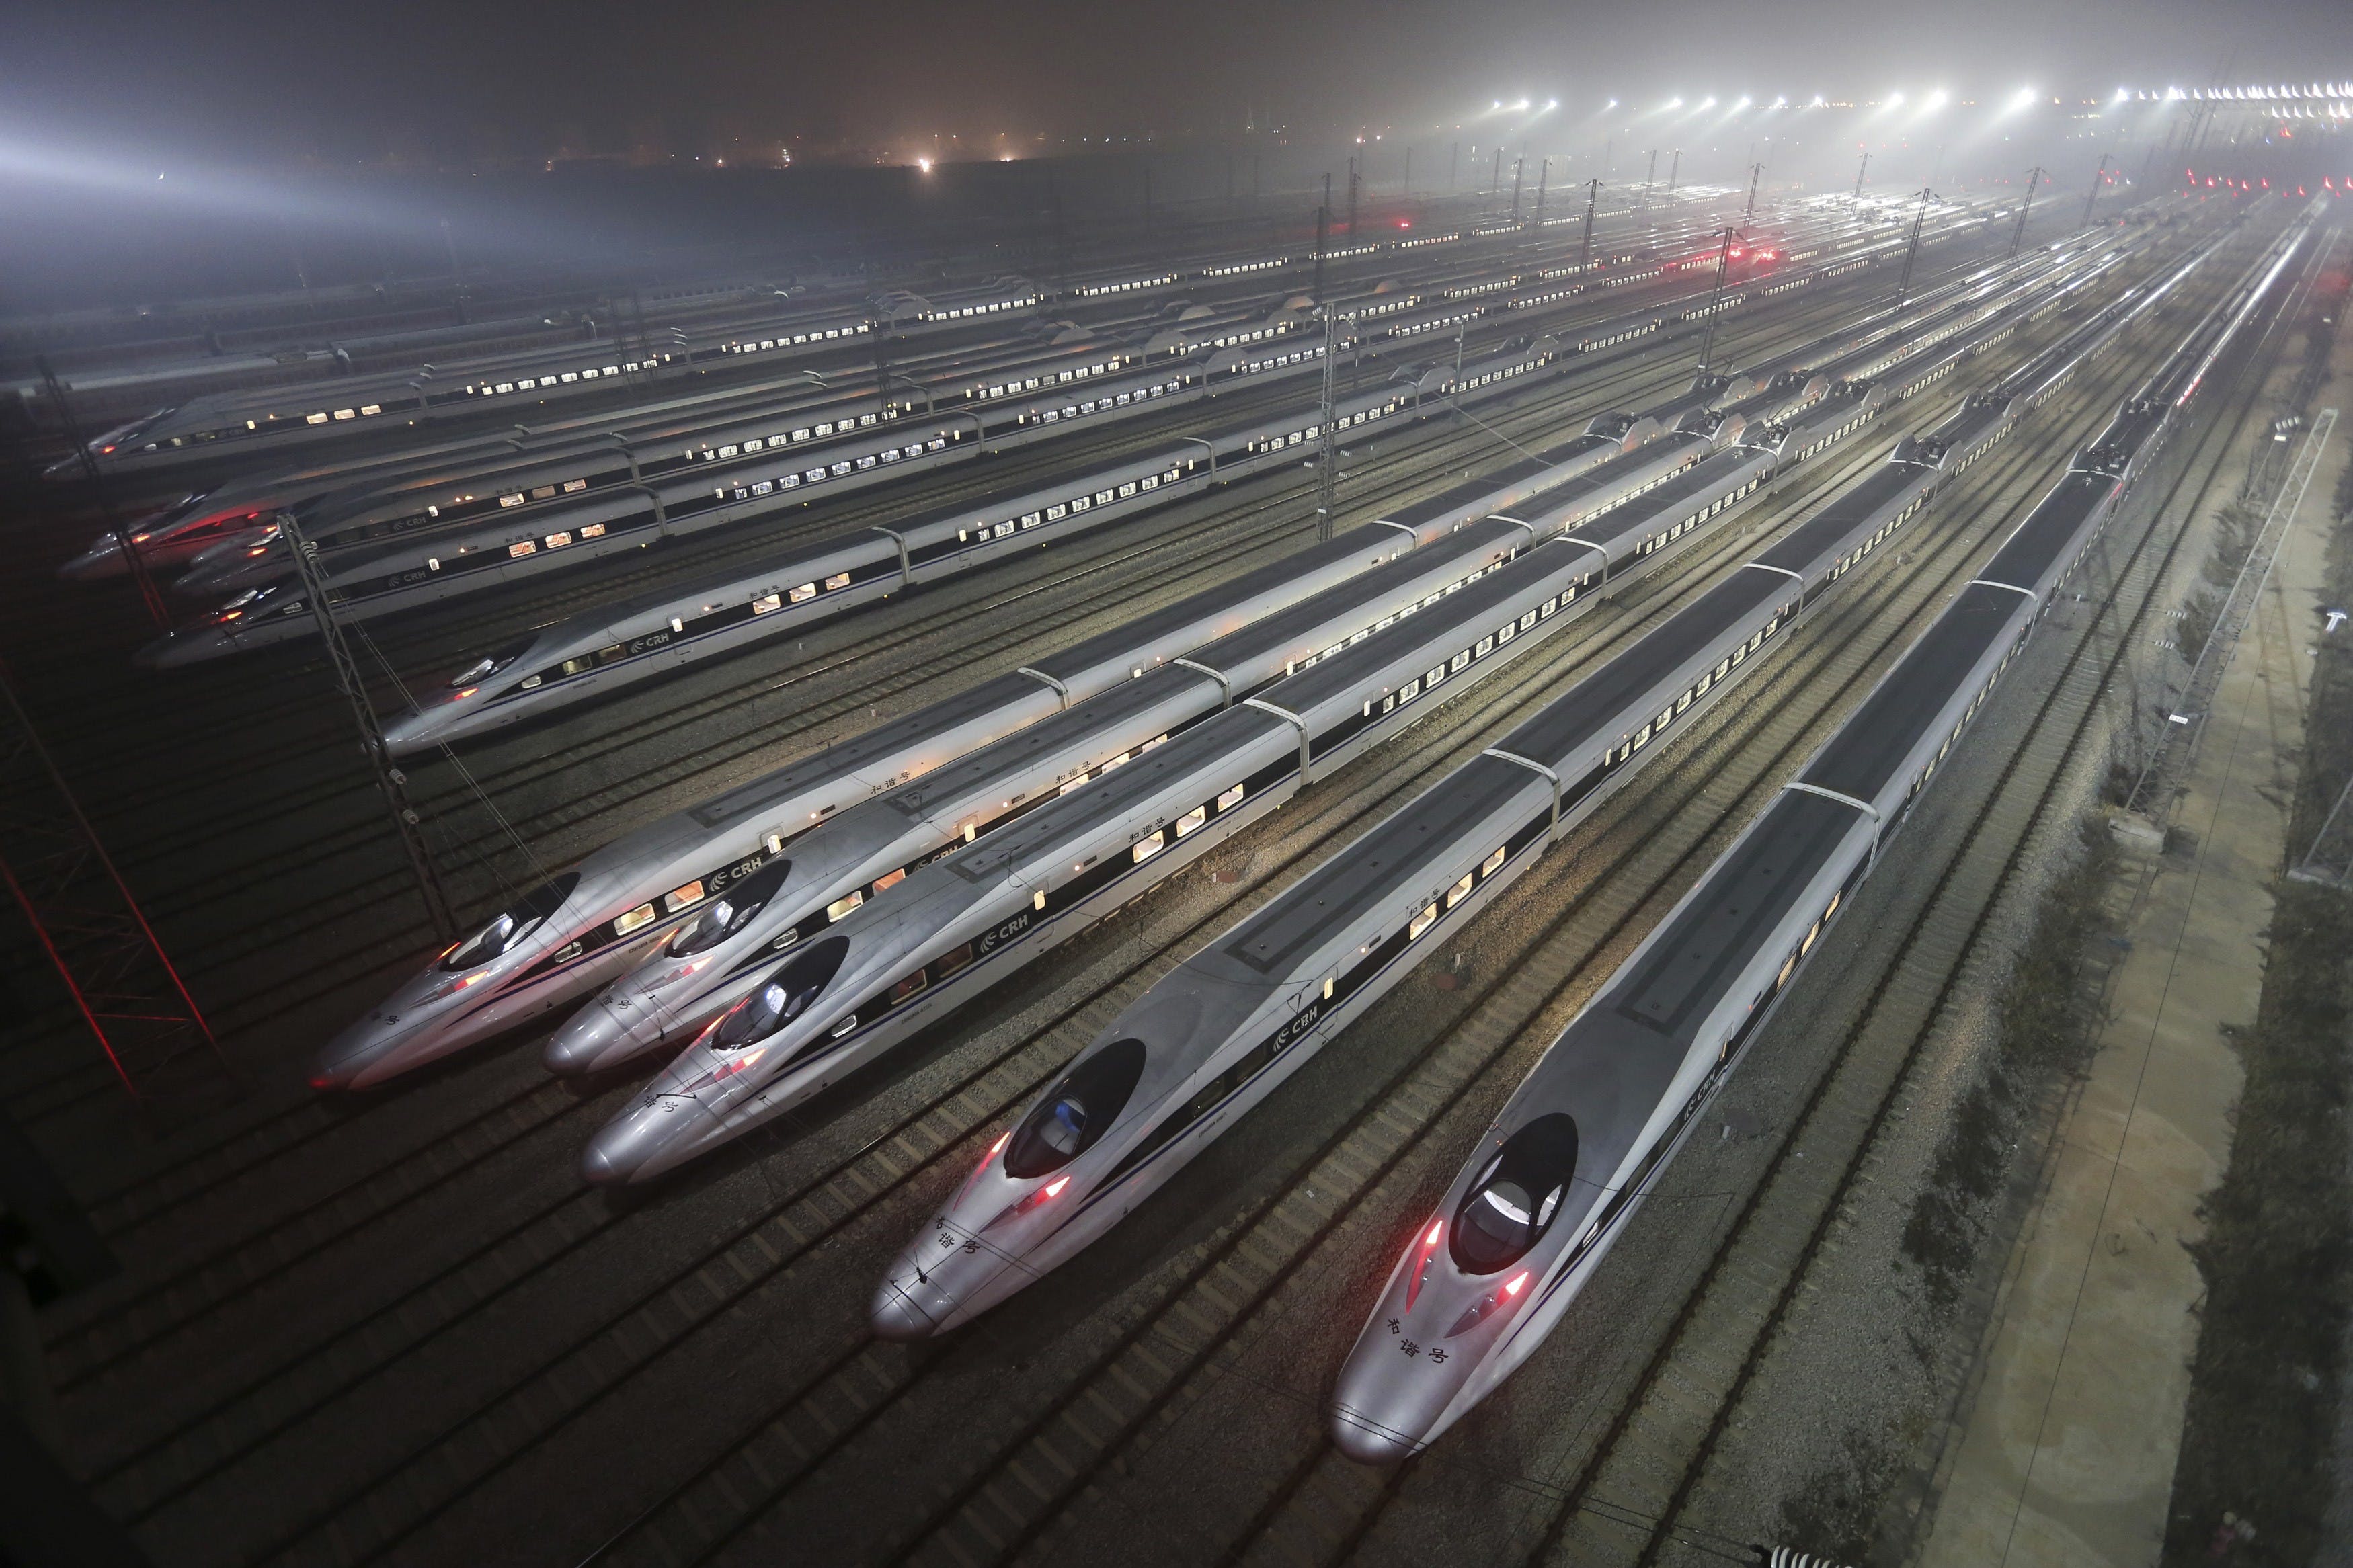 CRH380 Harmony bullet trains are seen at a high-speed train maintenance base in Wuhan